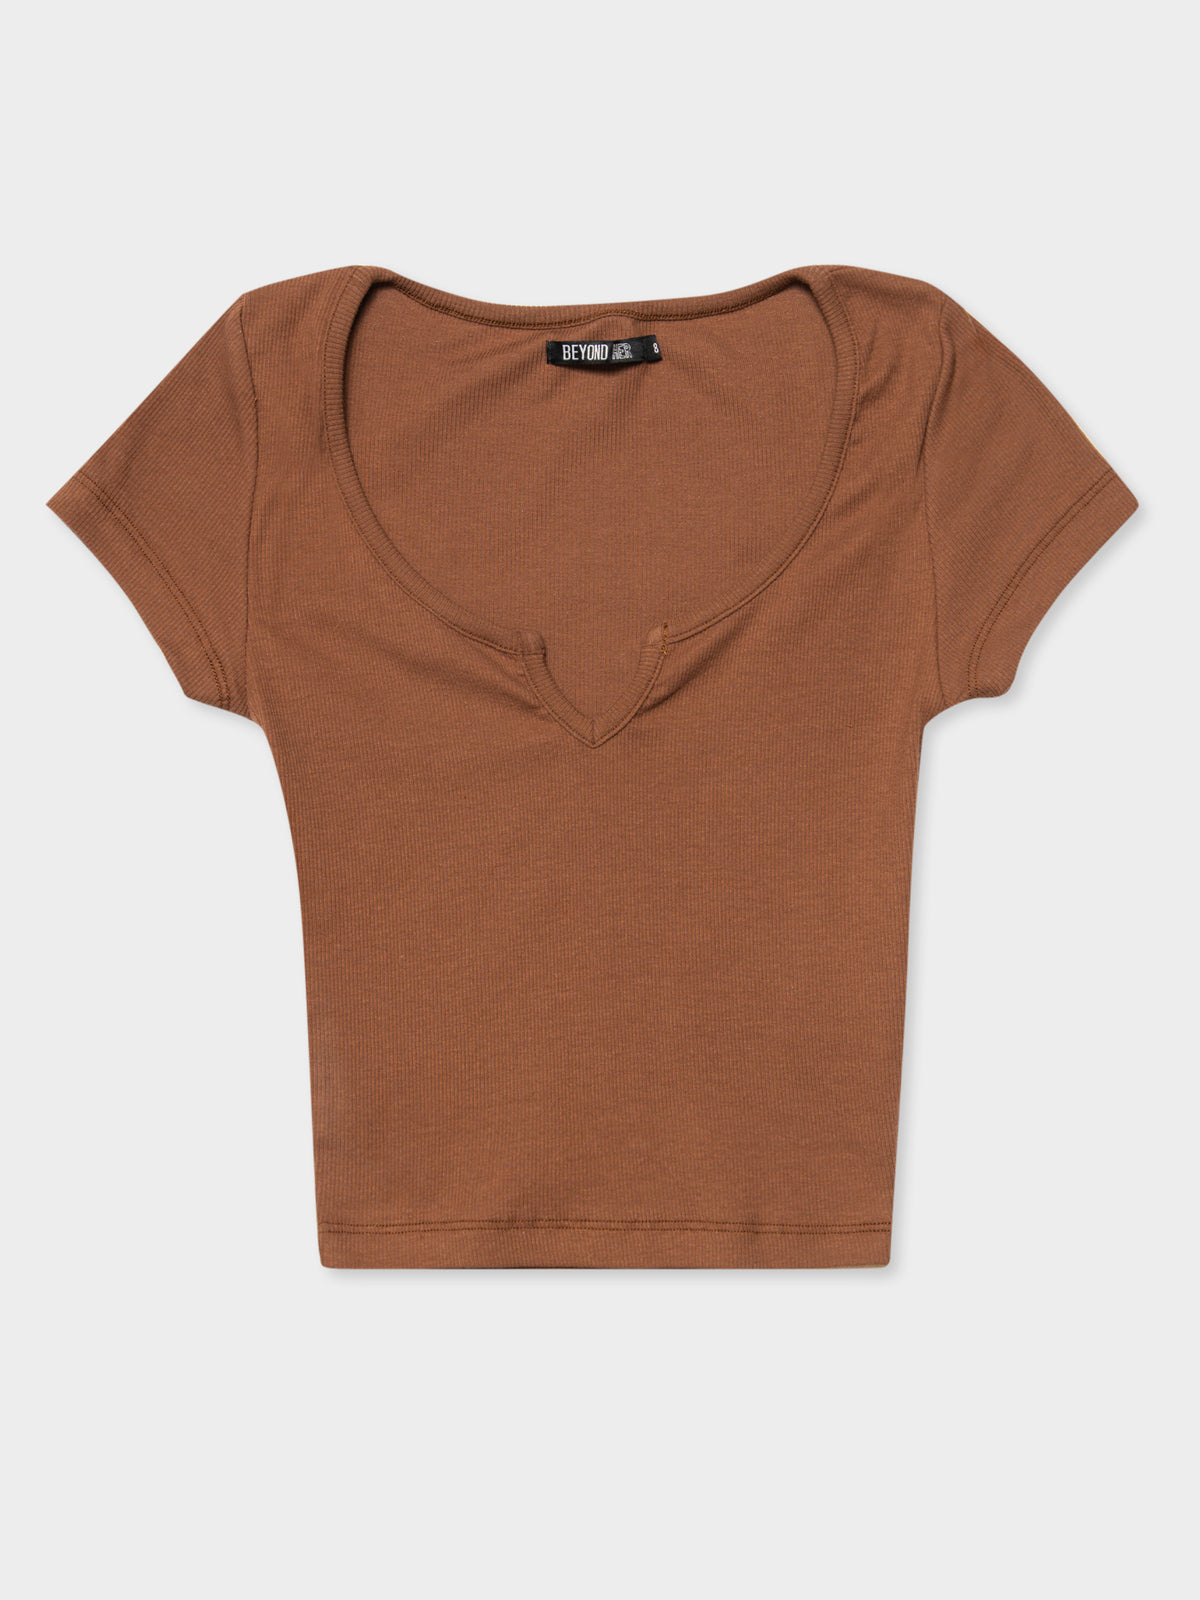 Bowie Cut Out T-Shirt in Chocolate Brown